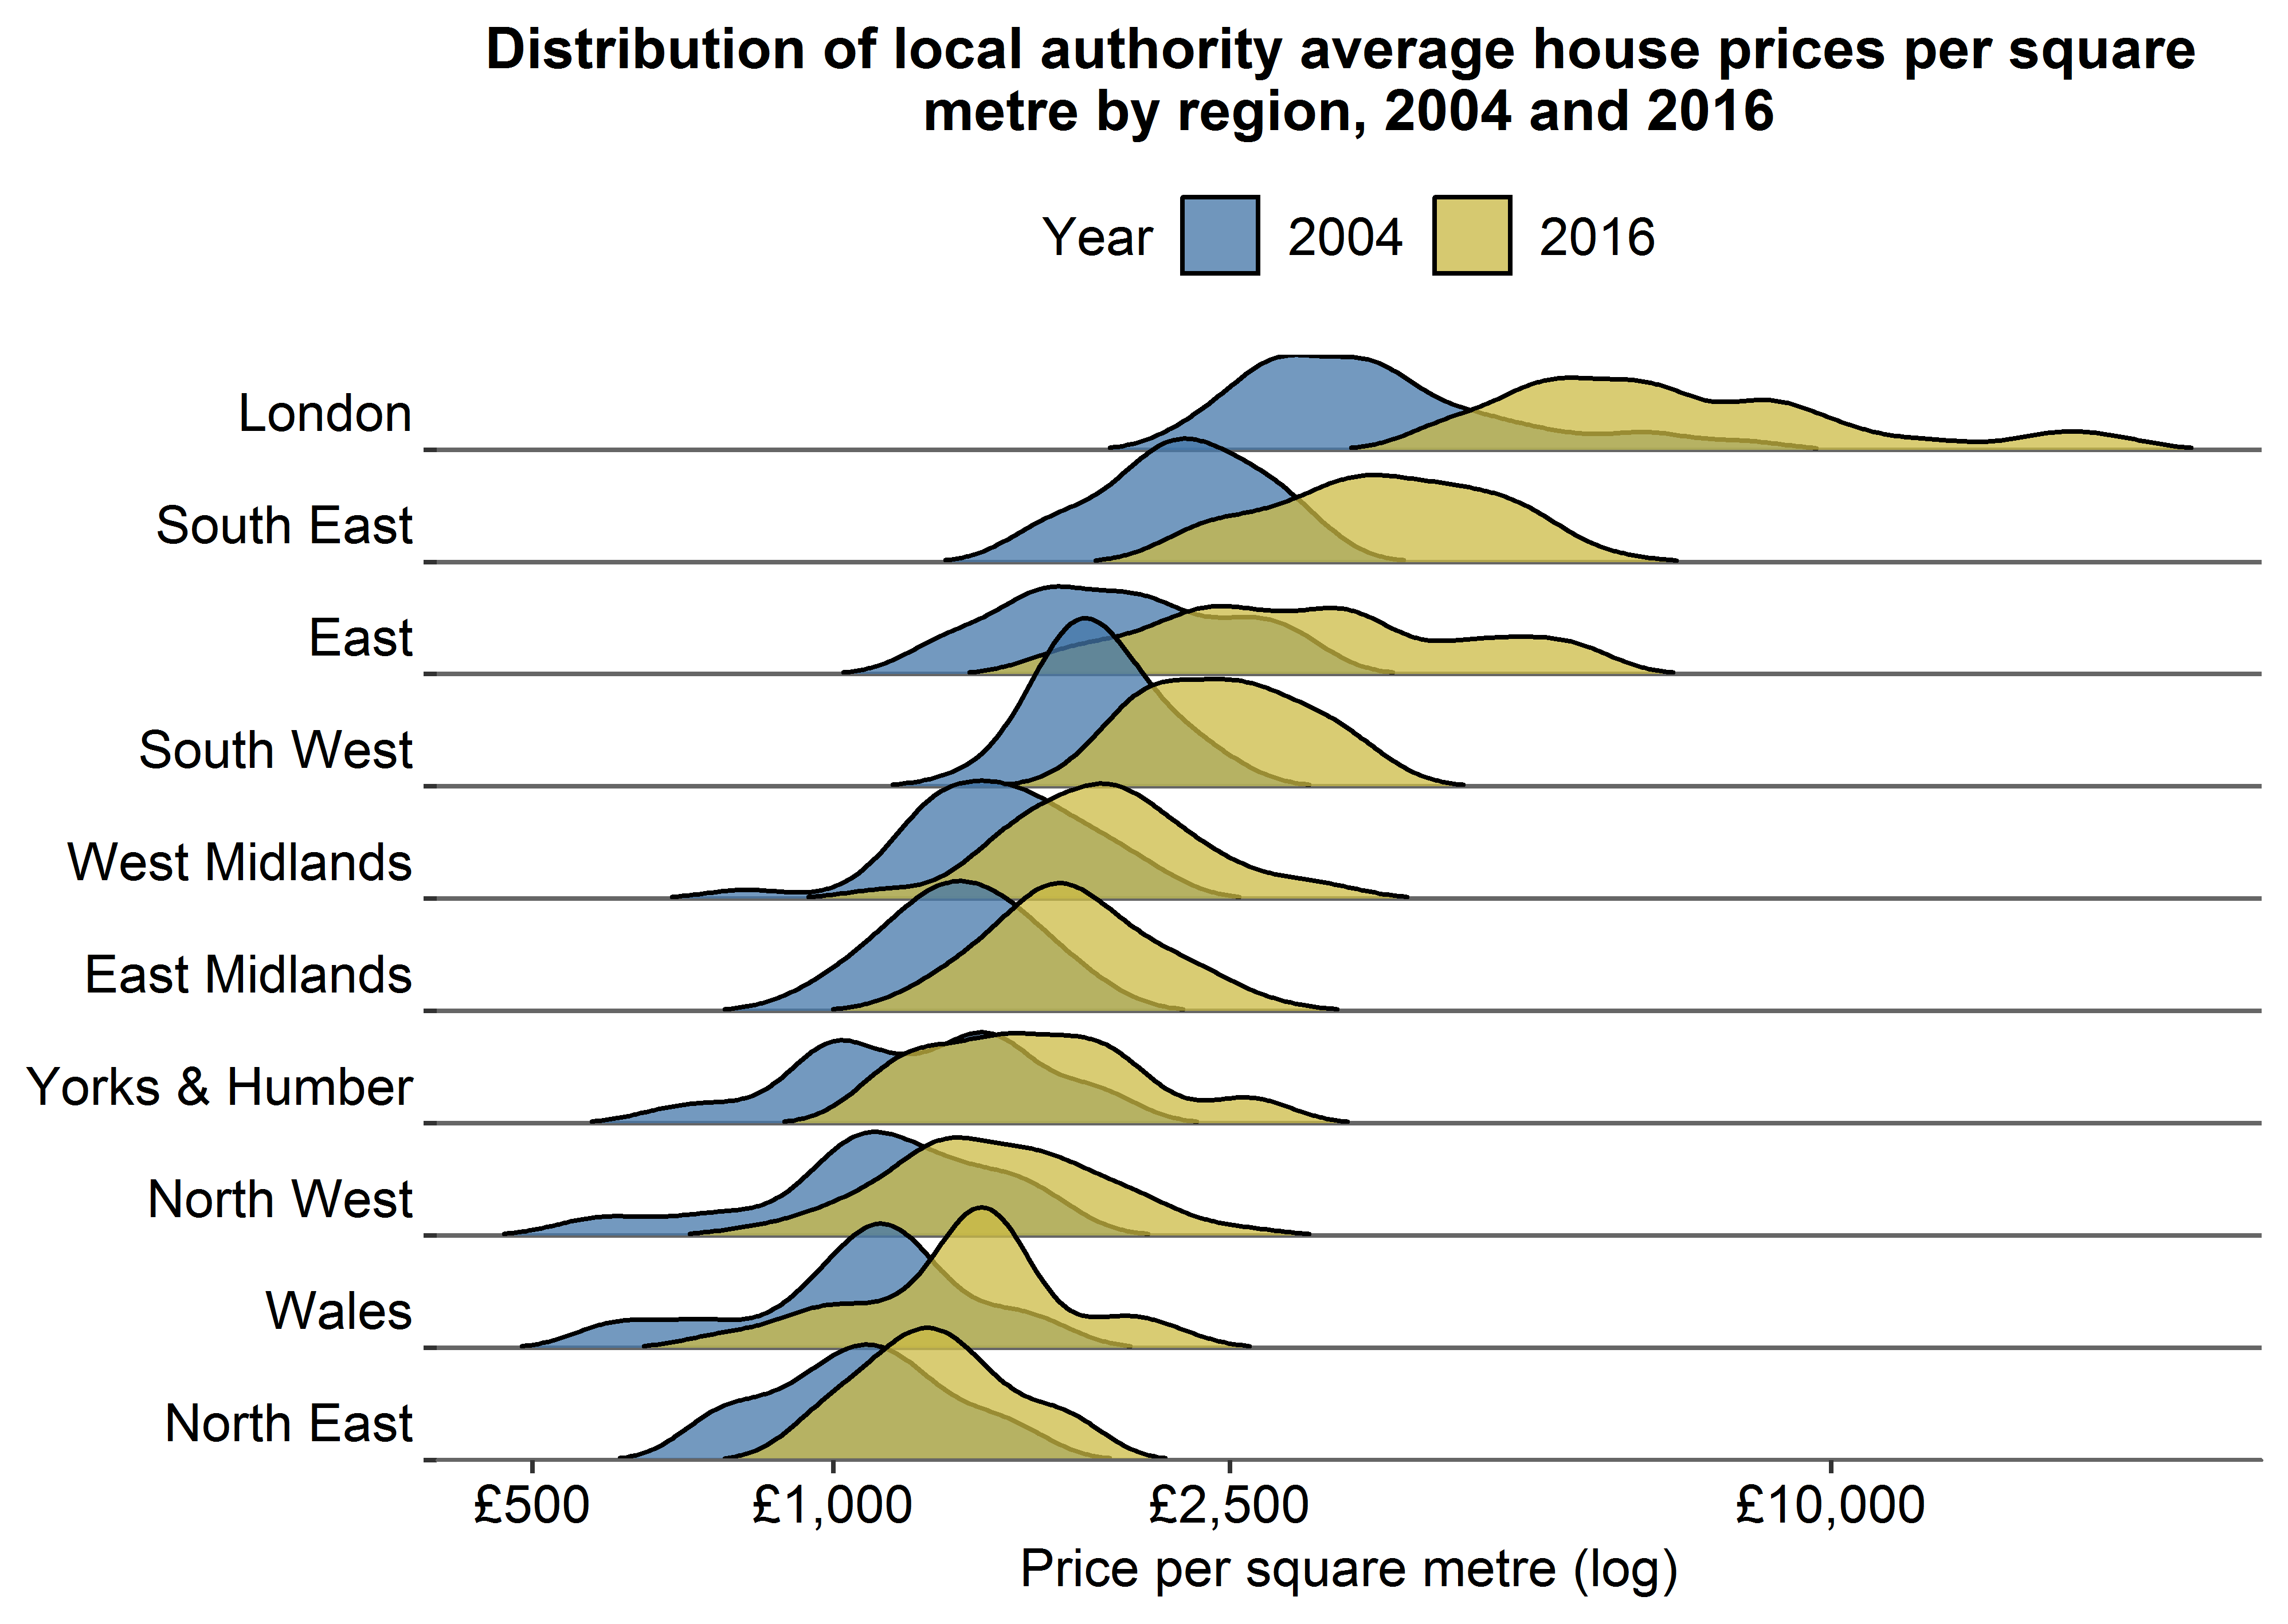 Distribution of local authority average house prices per square metre by region, 2004 and 2016